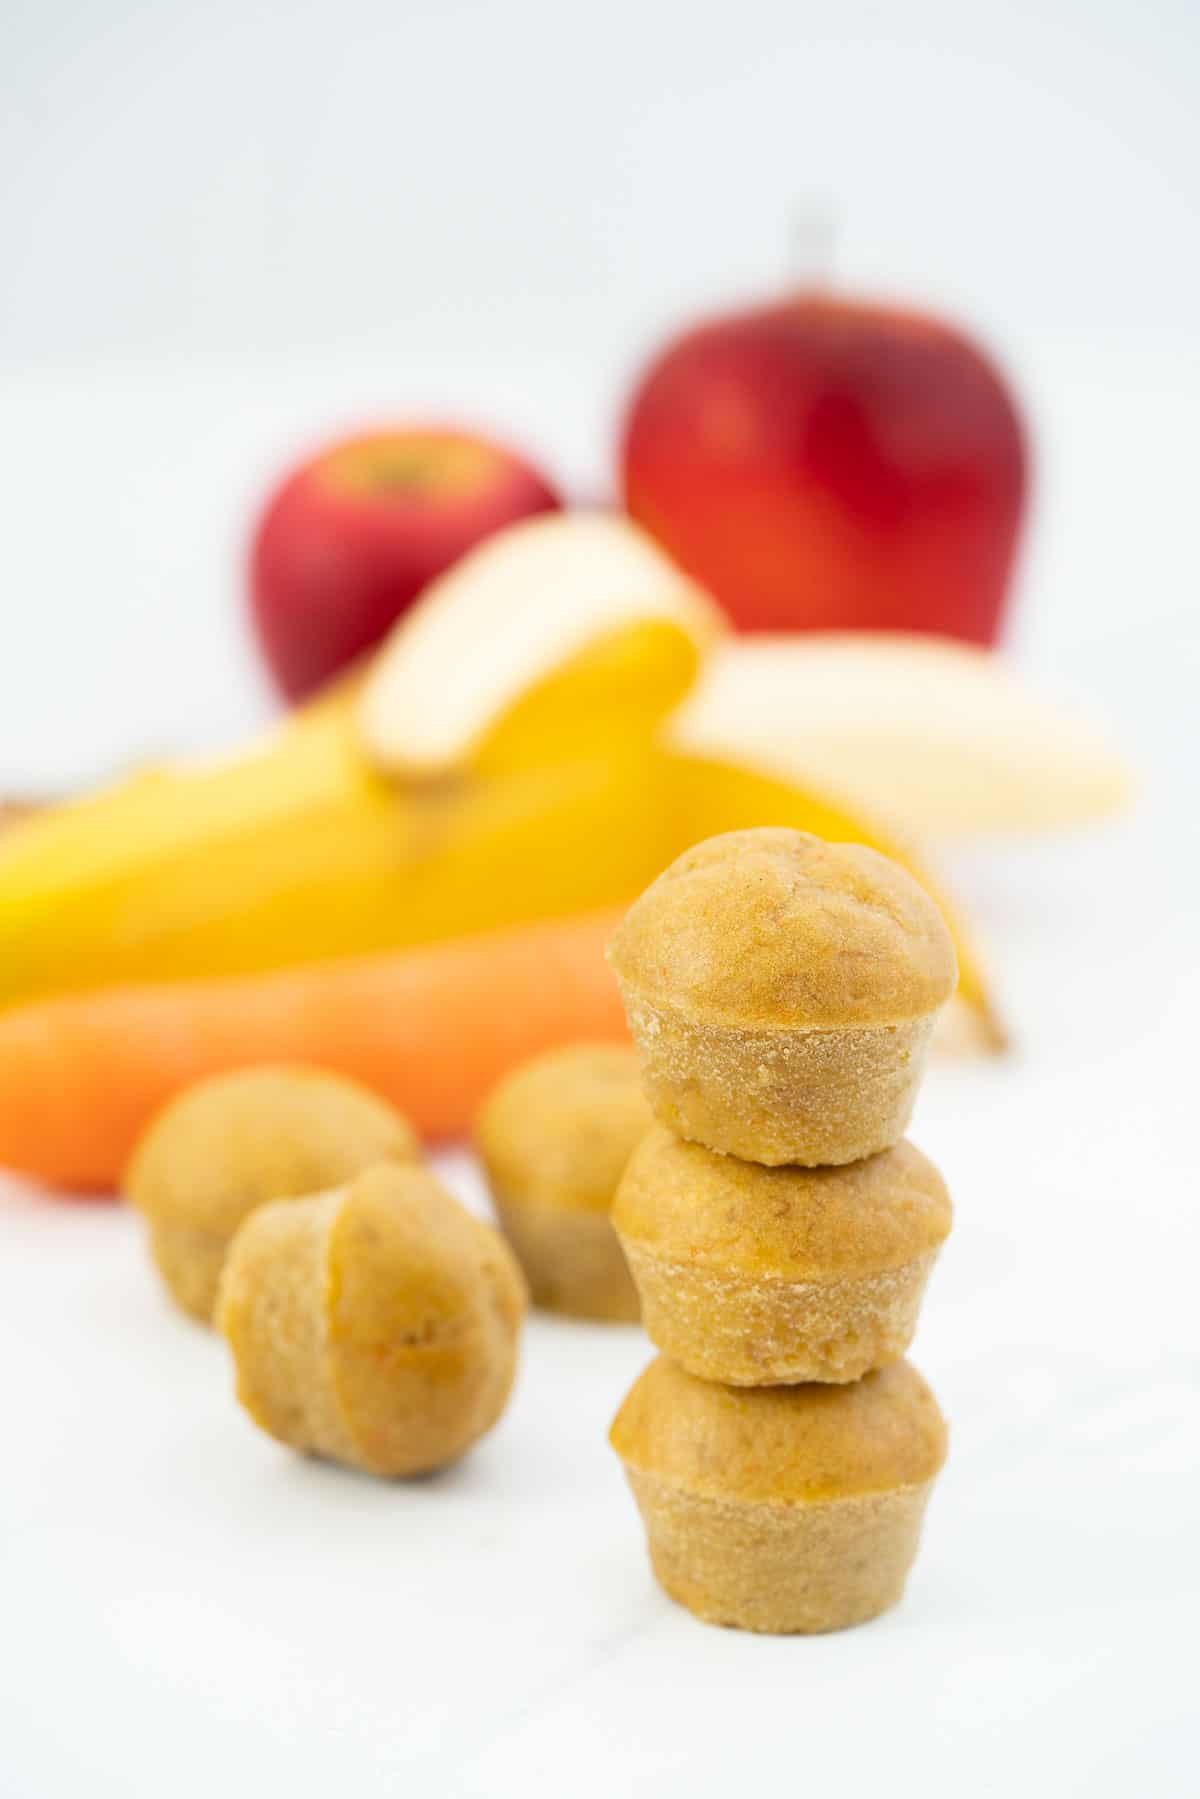 a tower of three mini muffins with apple, banana and carrots in the background.